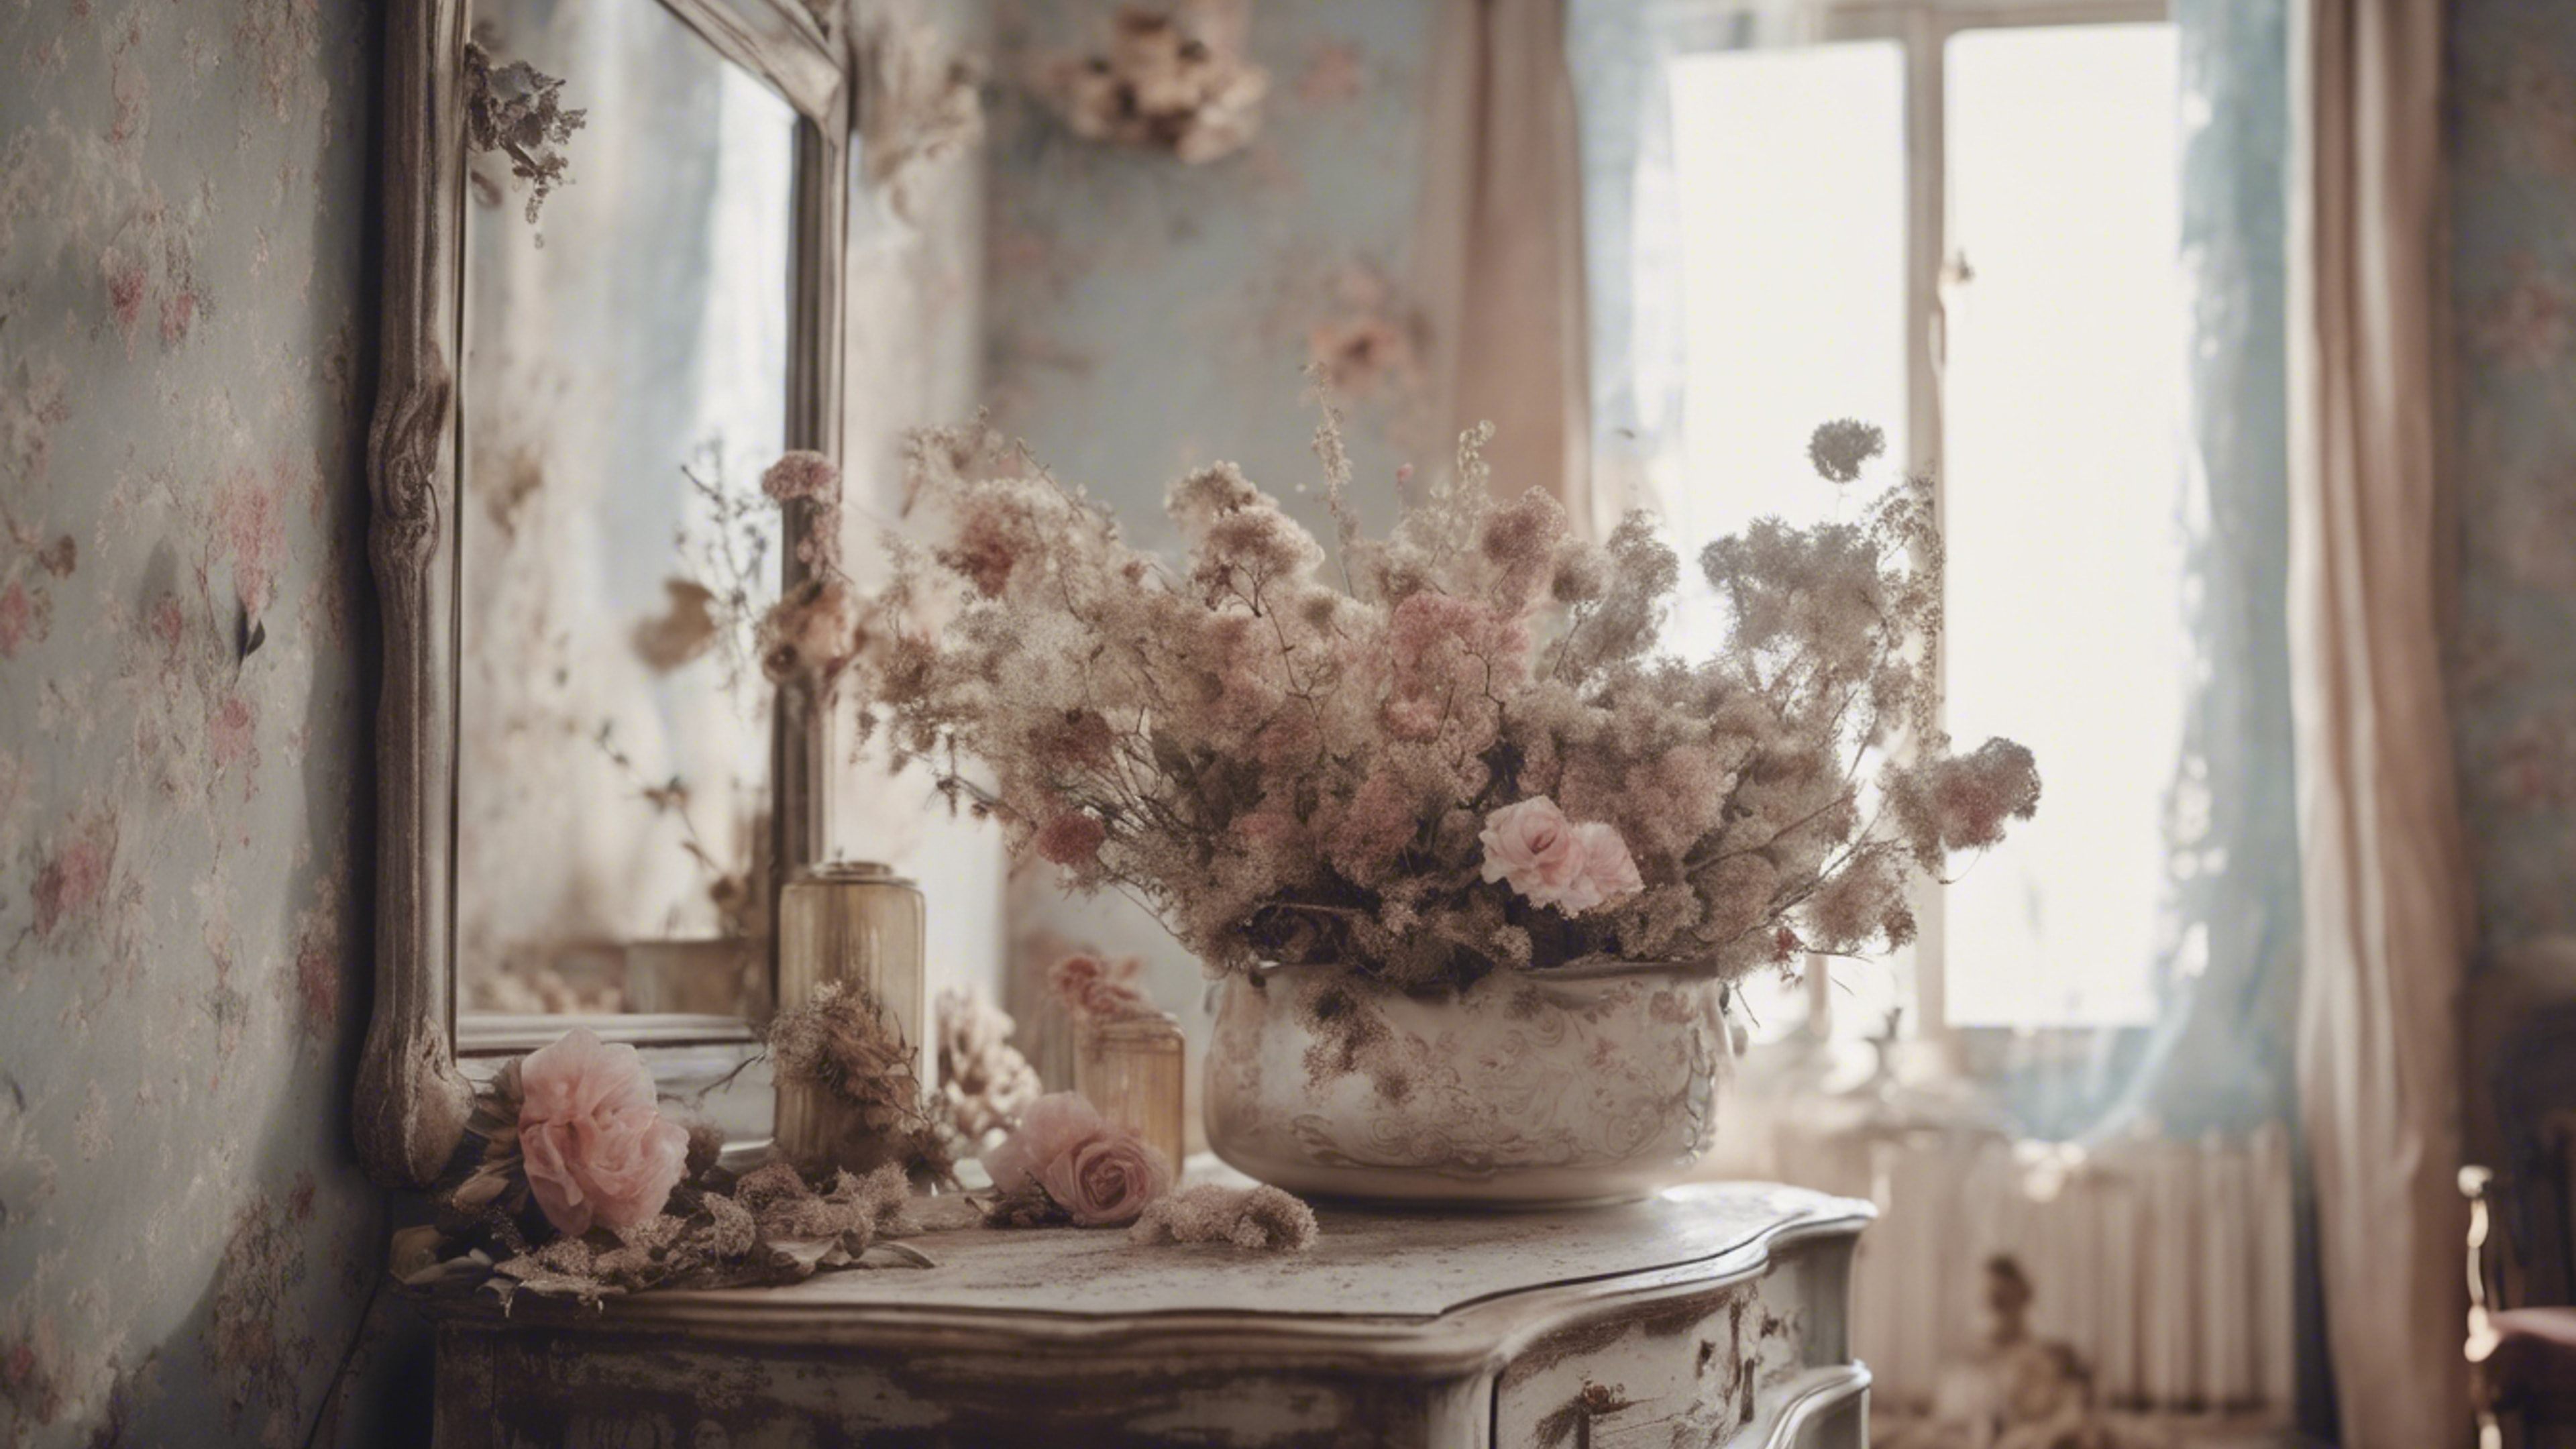 A shabby chic bedroom, decorated with dried flowers and antique, well-loved furniture. Wallpaper[fbba06827be04bc9b02f]